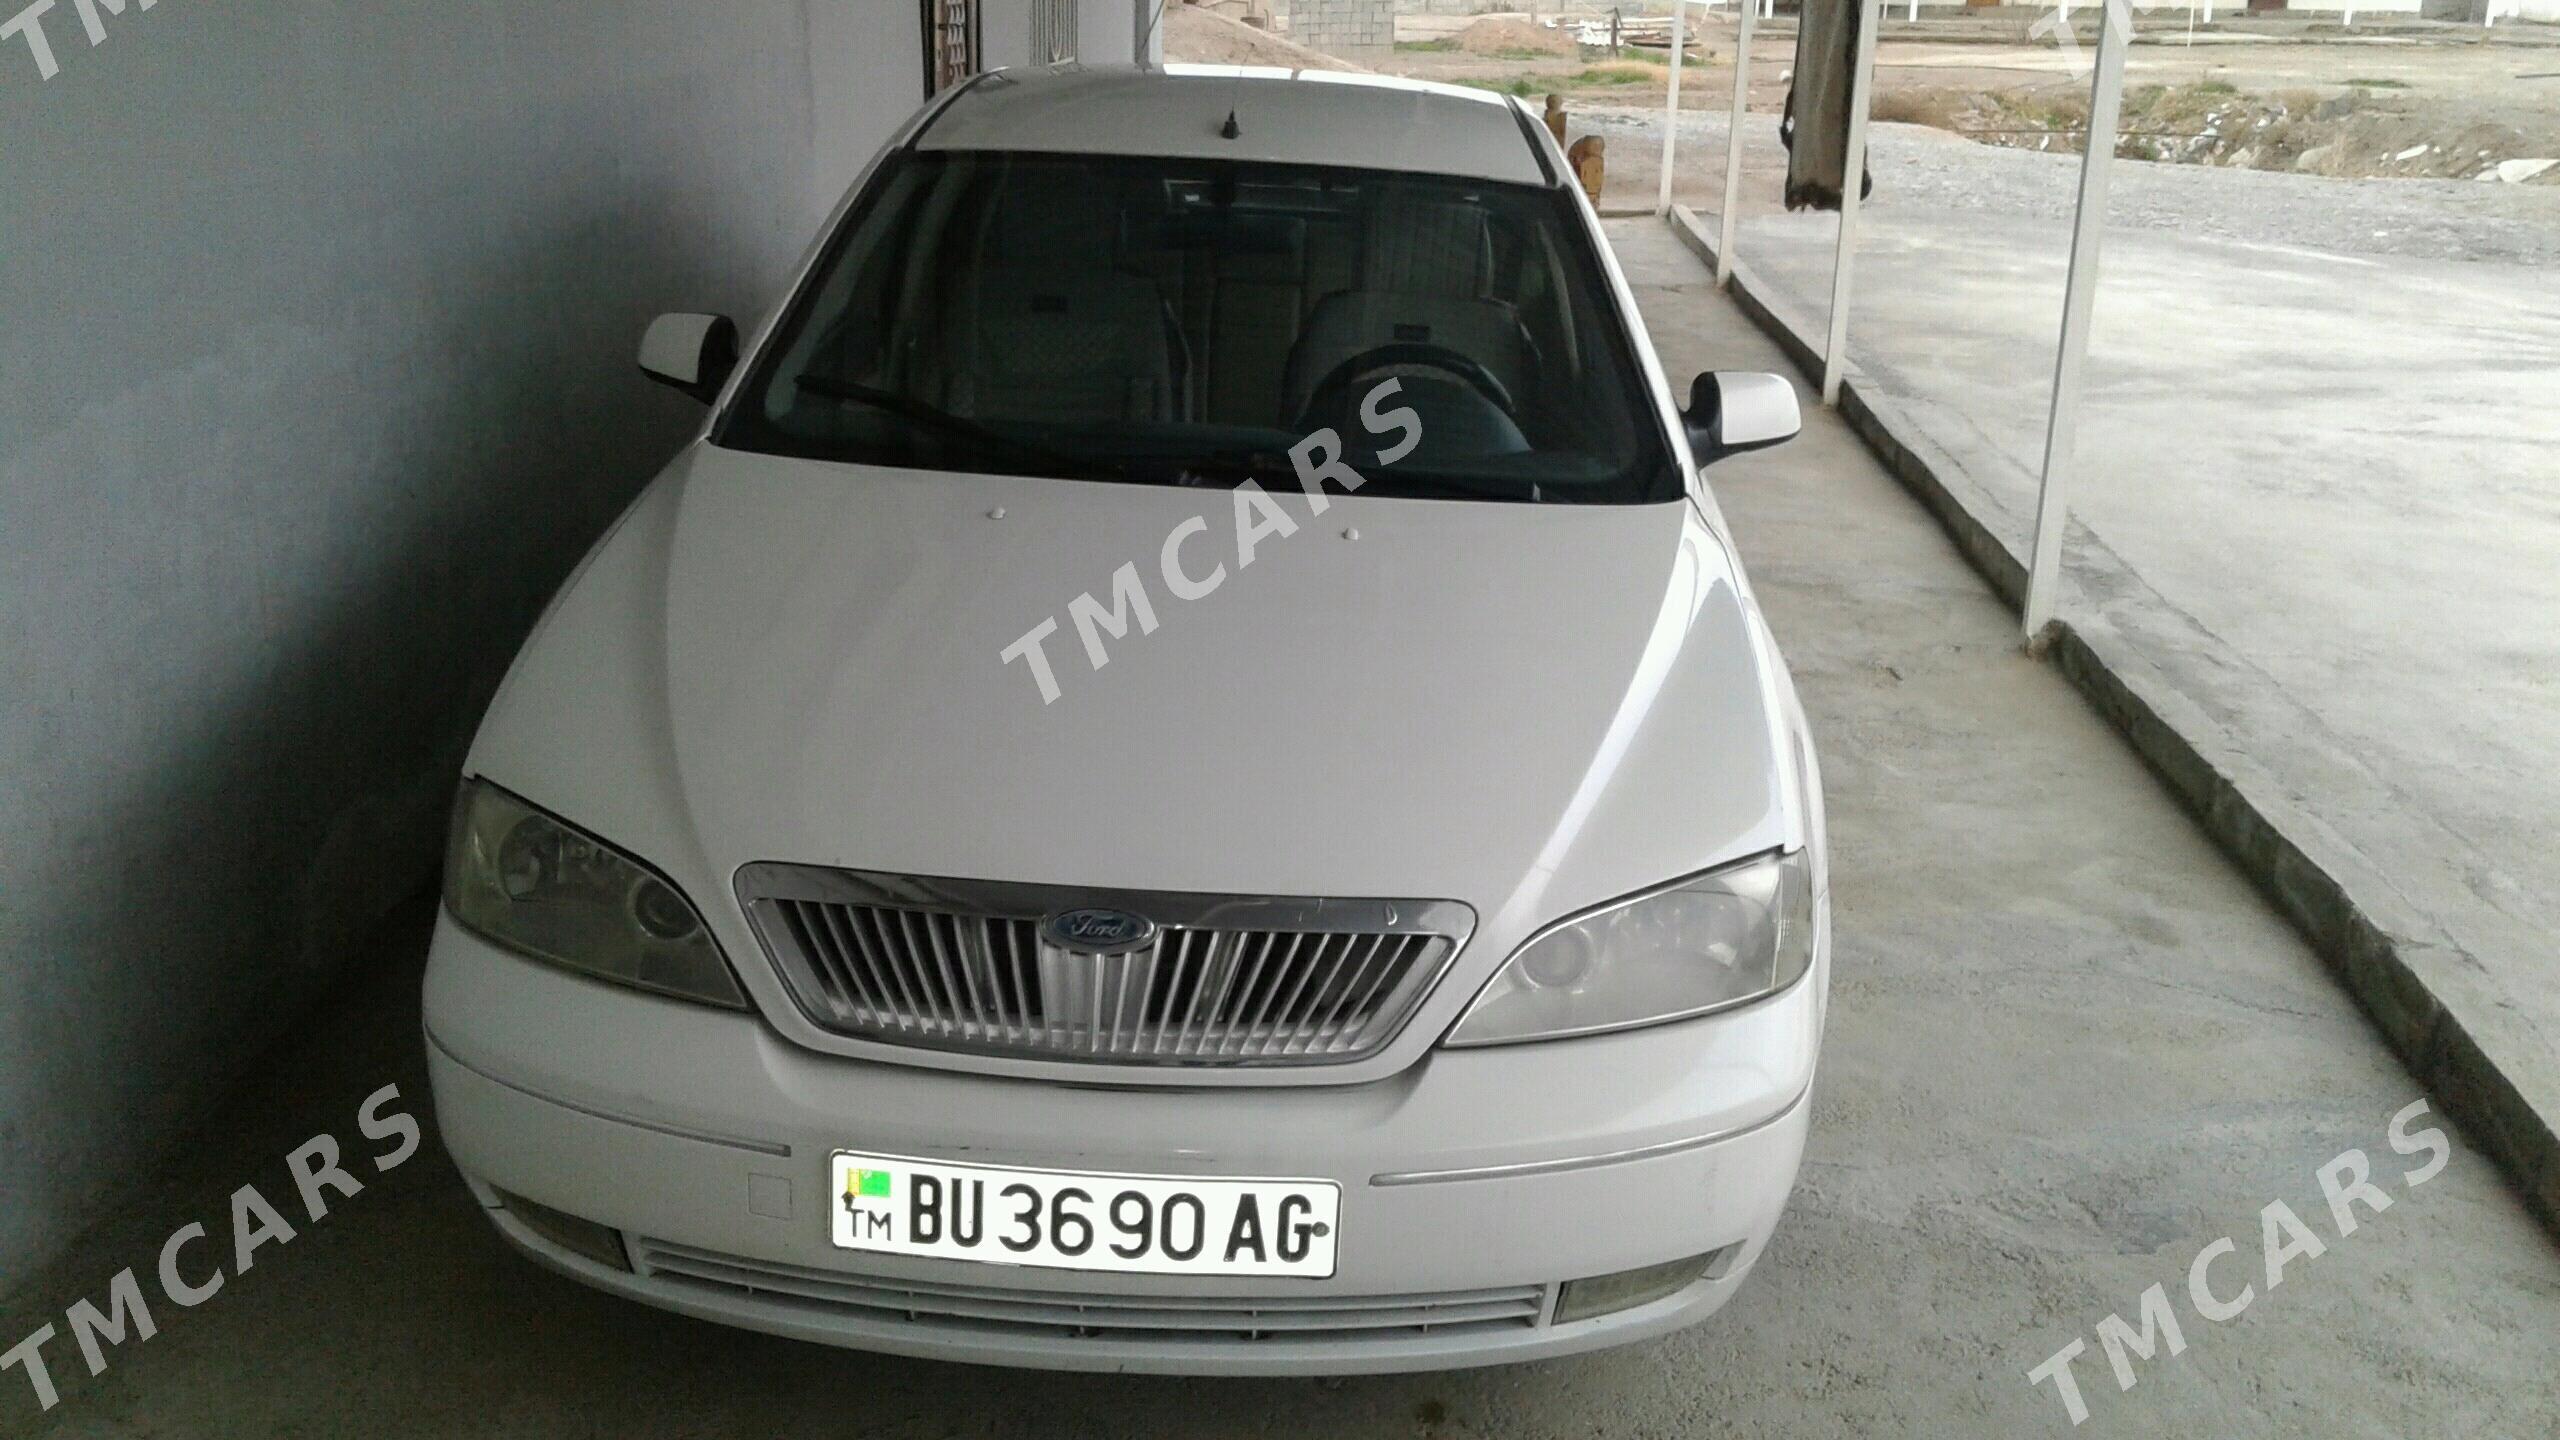 Ford Mondeo 2001 - 45 000 TMT - Багир - img 2